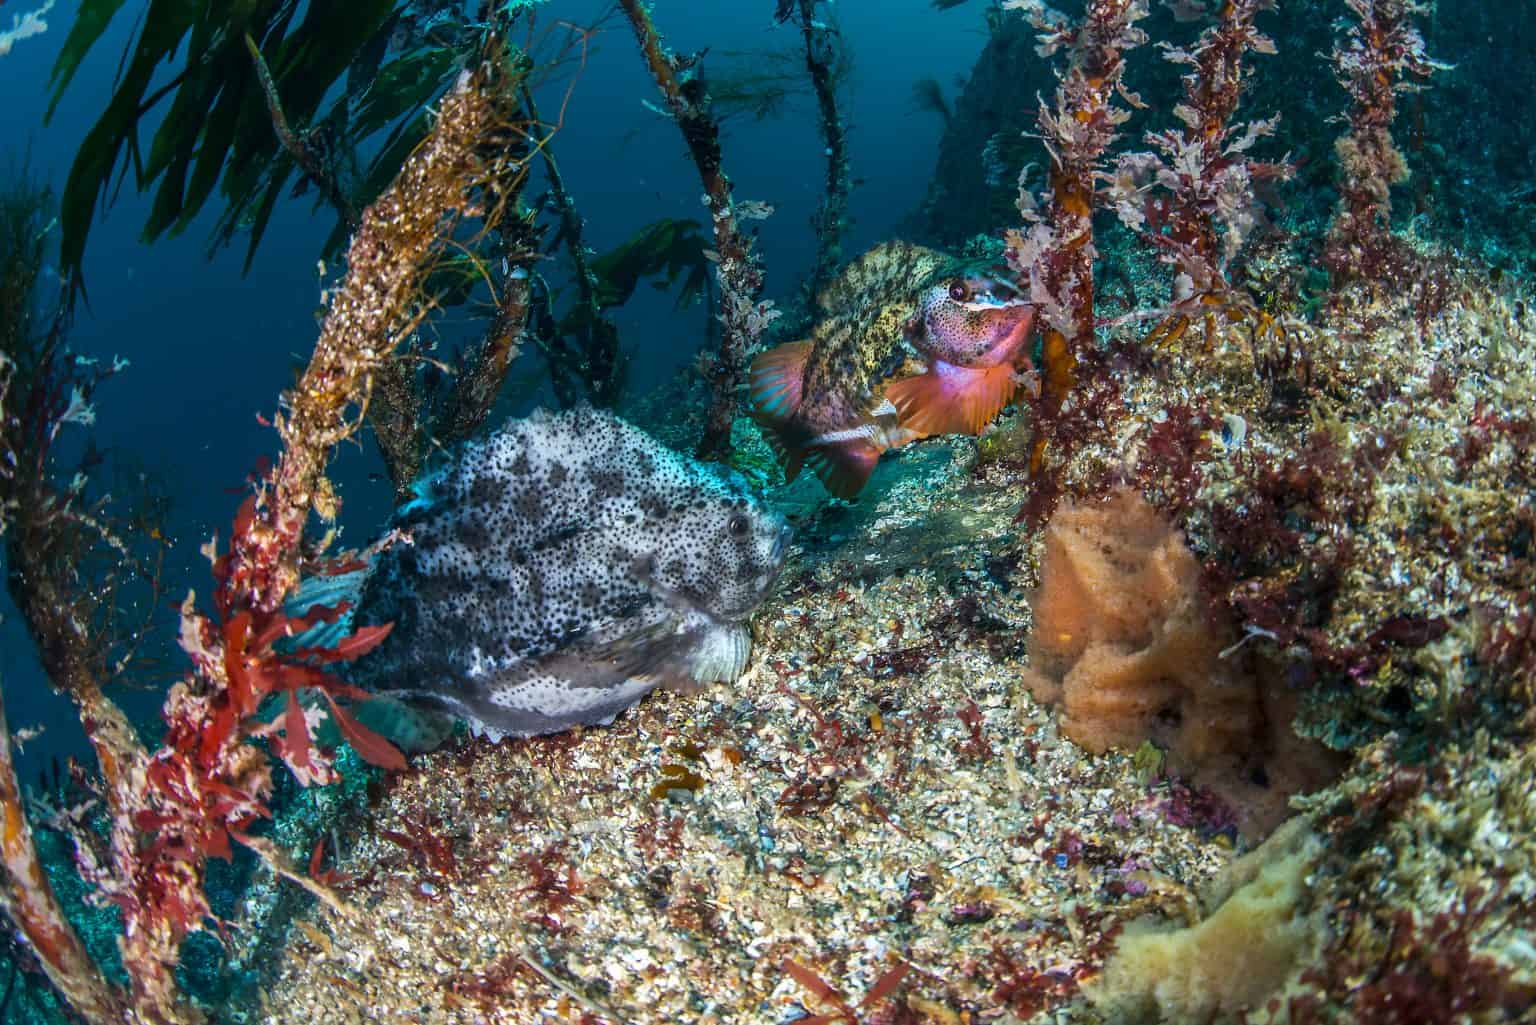 Colourful fish and seaweed interacting on the sea floor.